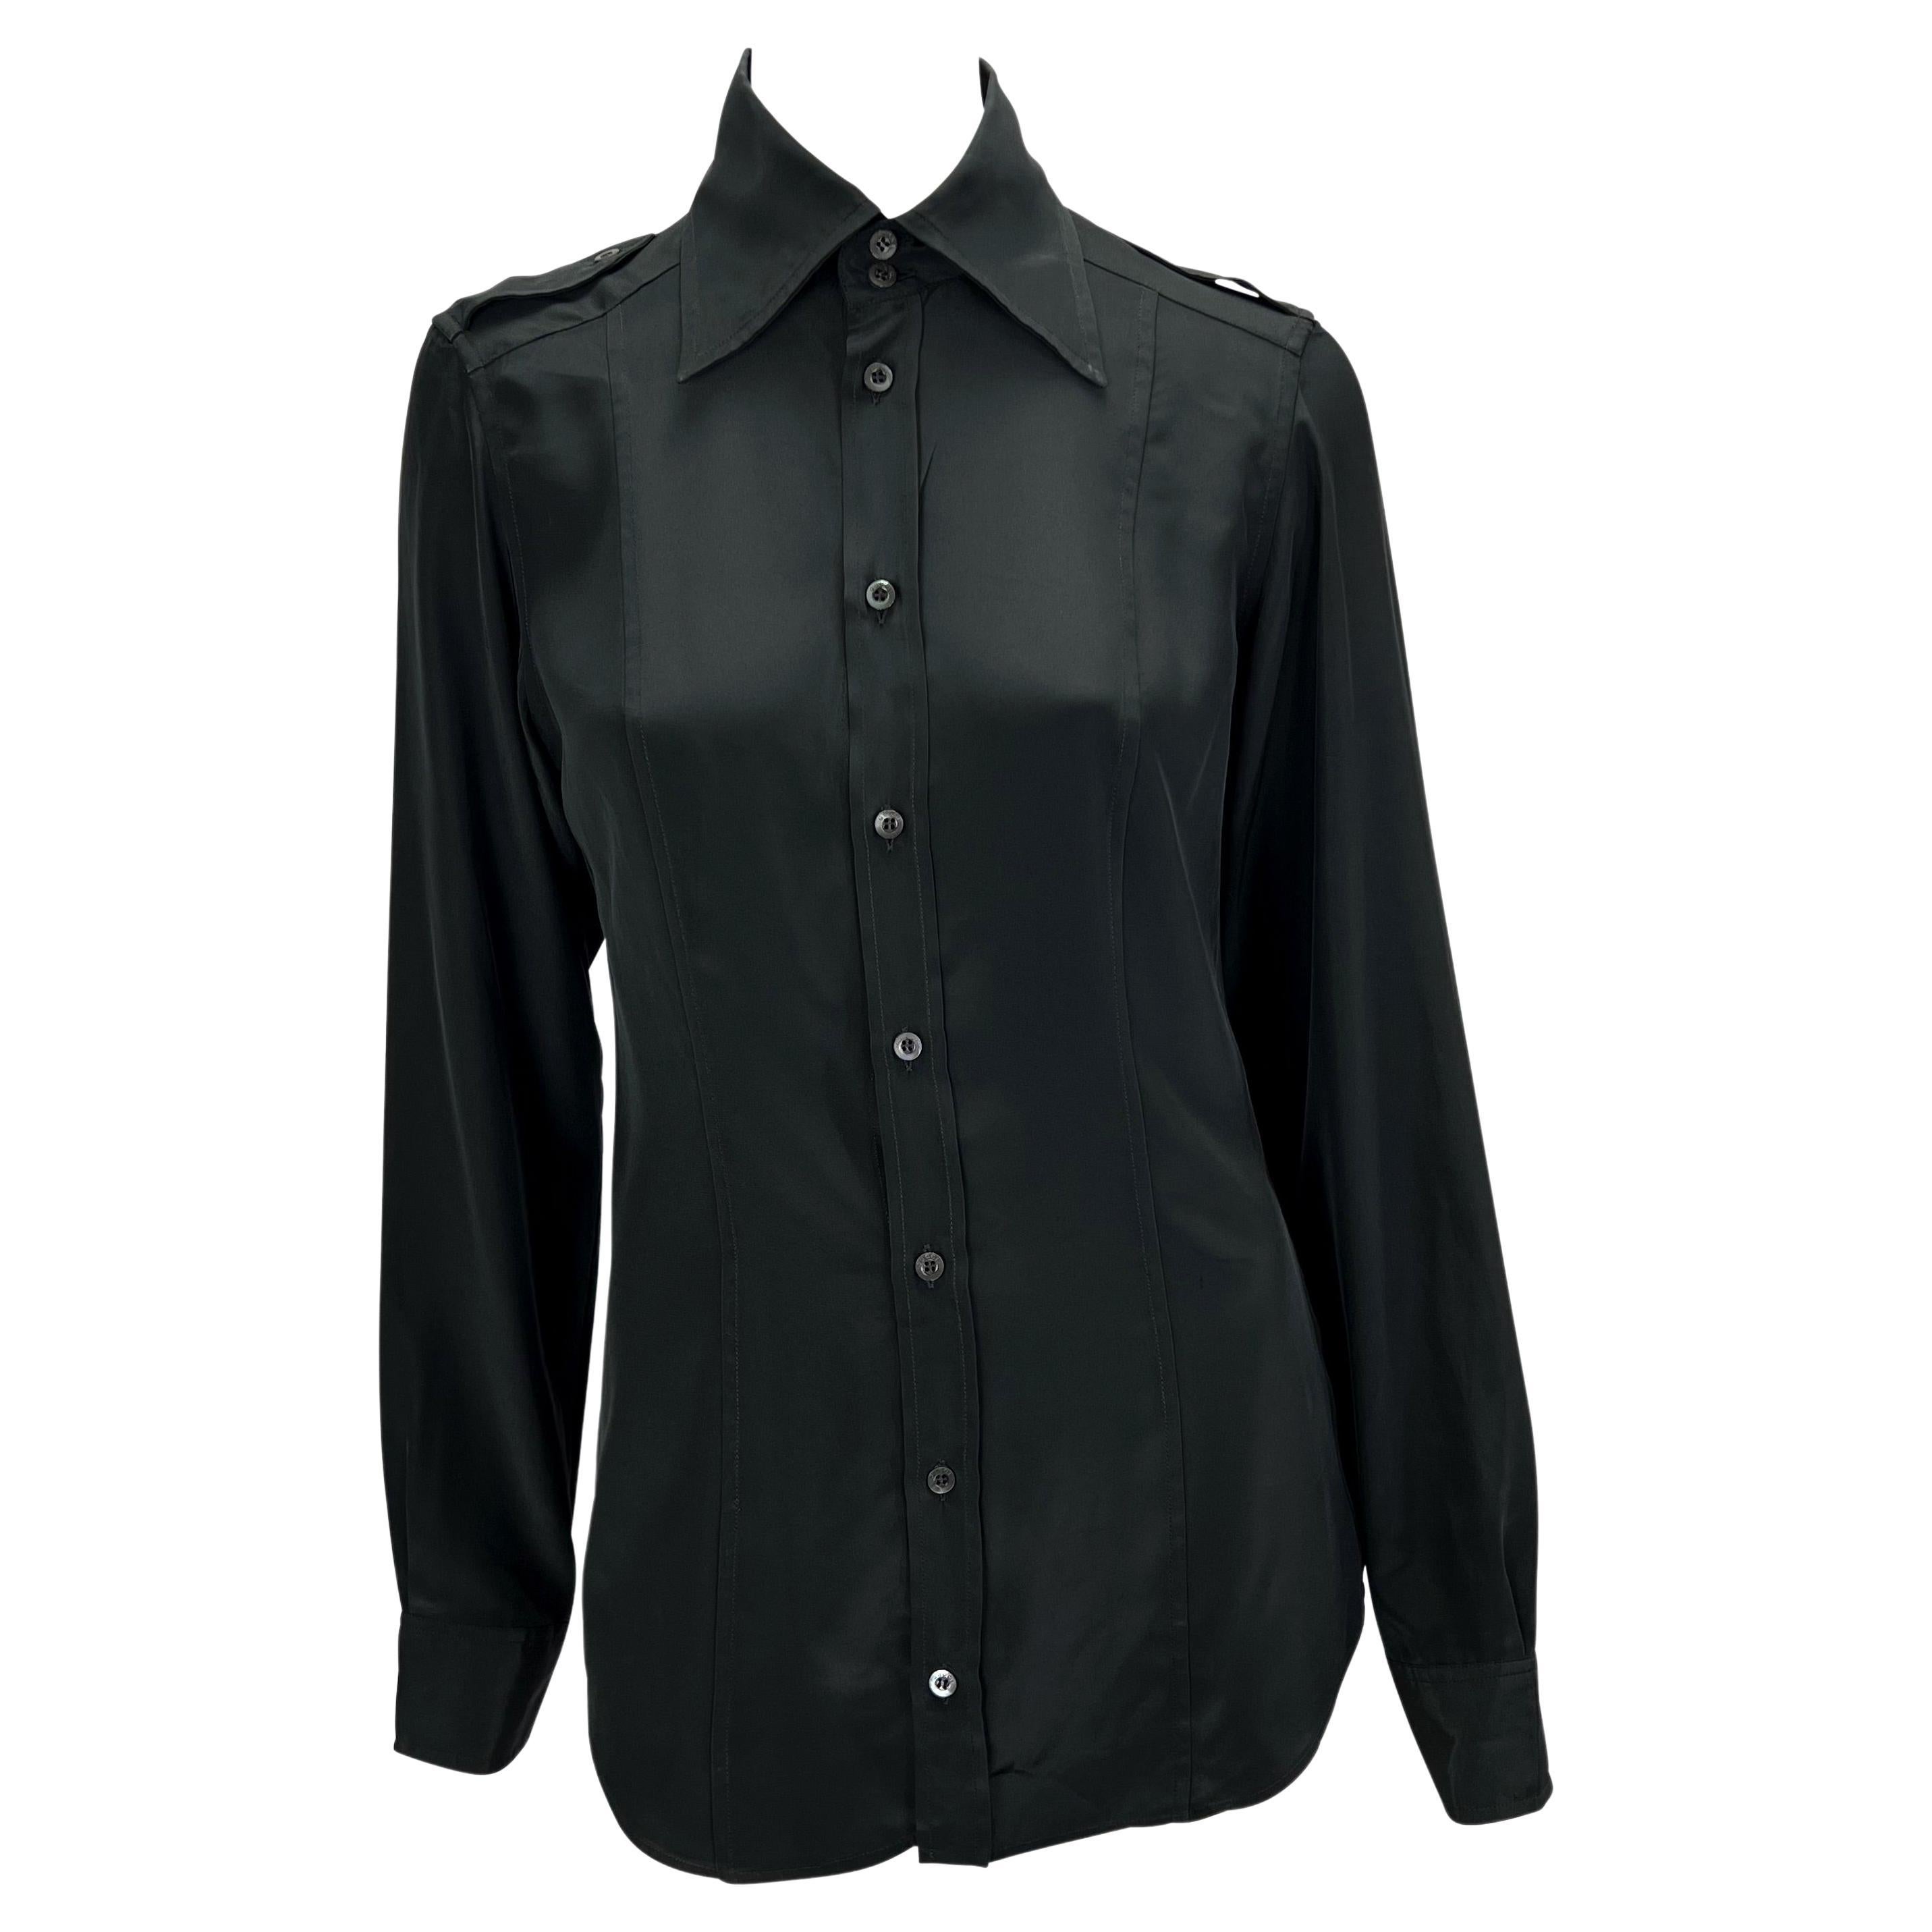 S/S 1996 Gucci by Tom Ford Black Panel Epaulettes Button Up Top For Sale